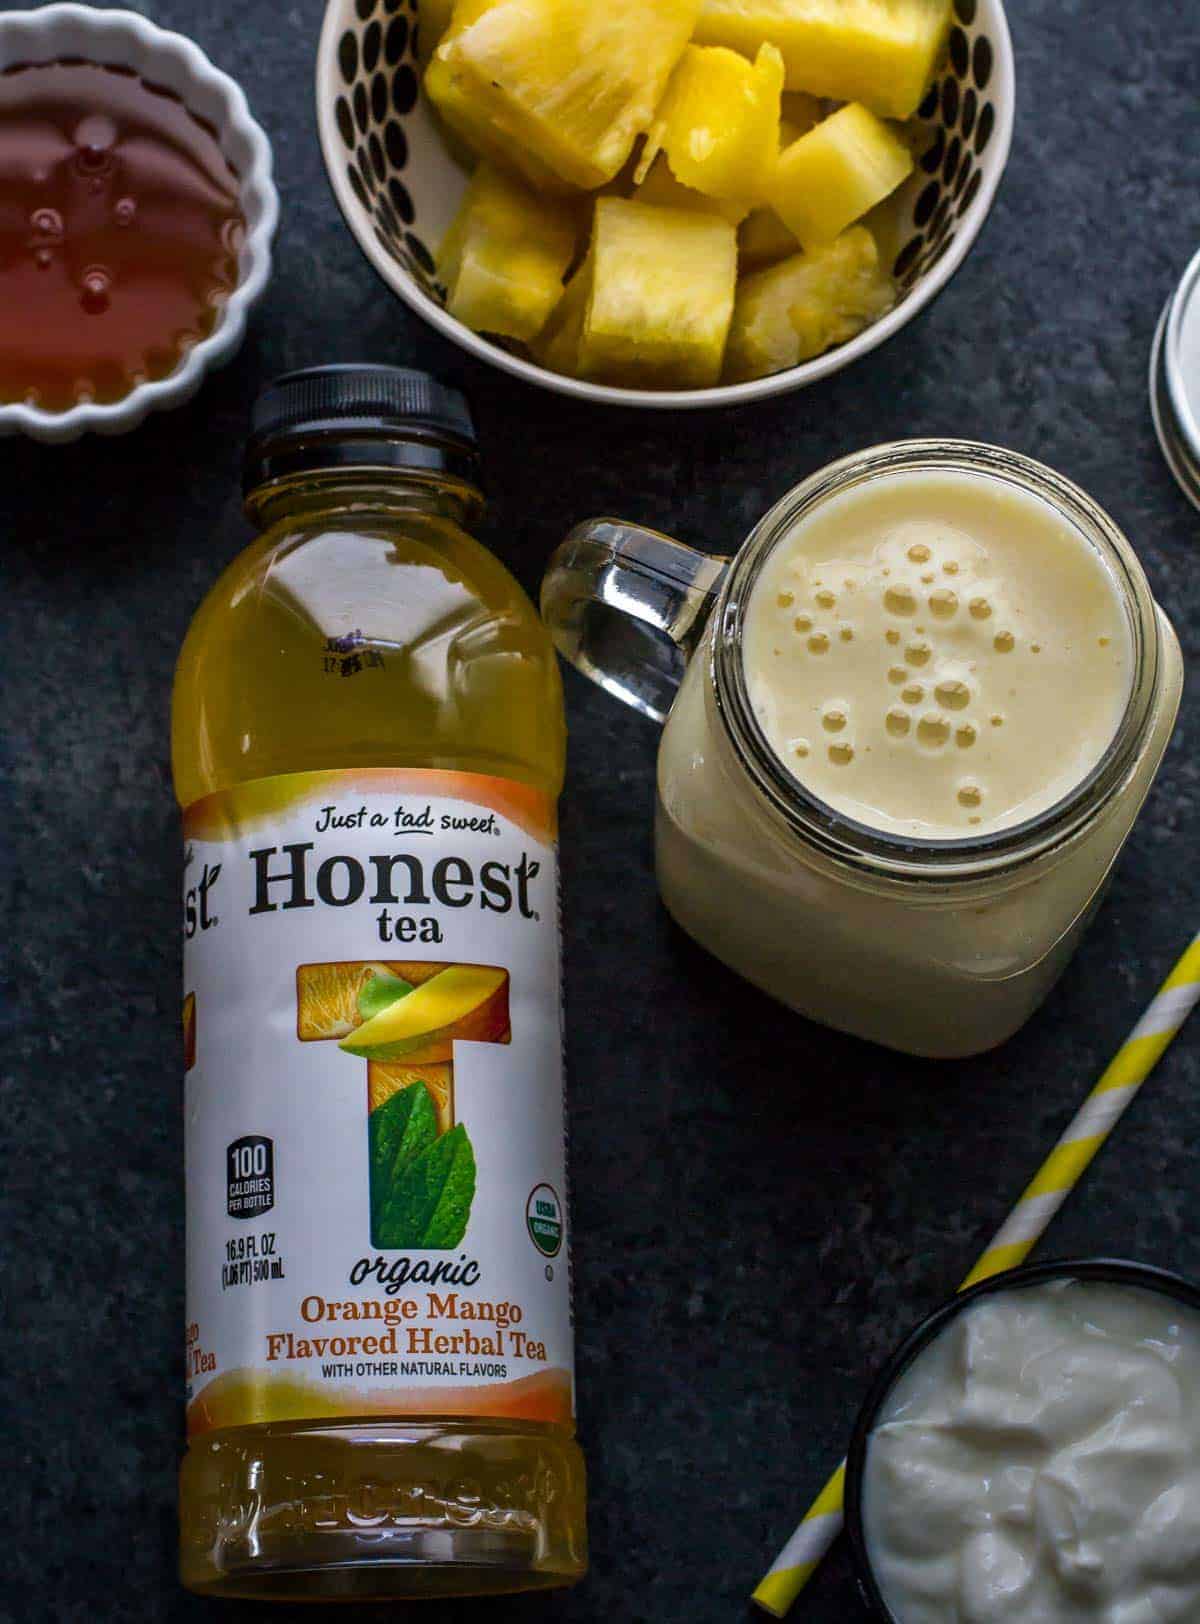 A bottle of Honest Tea (Orange Mango Flavored Herbal Tea) is shown along with Pineapple orange mango smoothie served in a glass jar with a yellow straw on the side. You can also see a bowl of yogurt, honey and pineapple on the side.